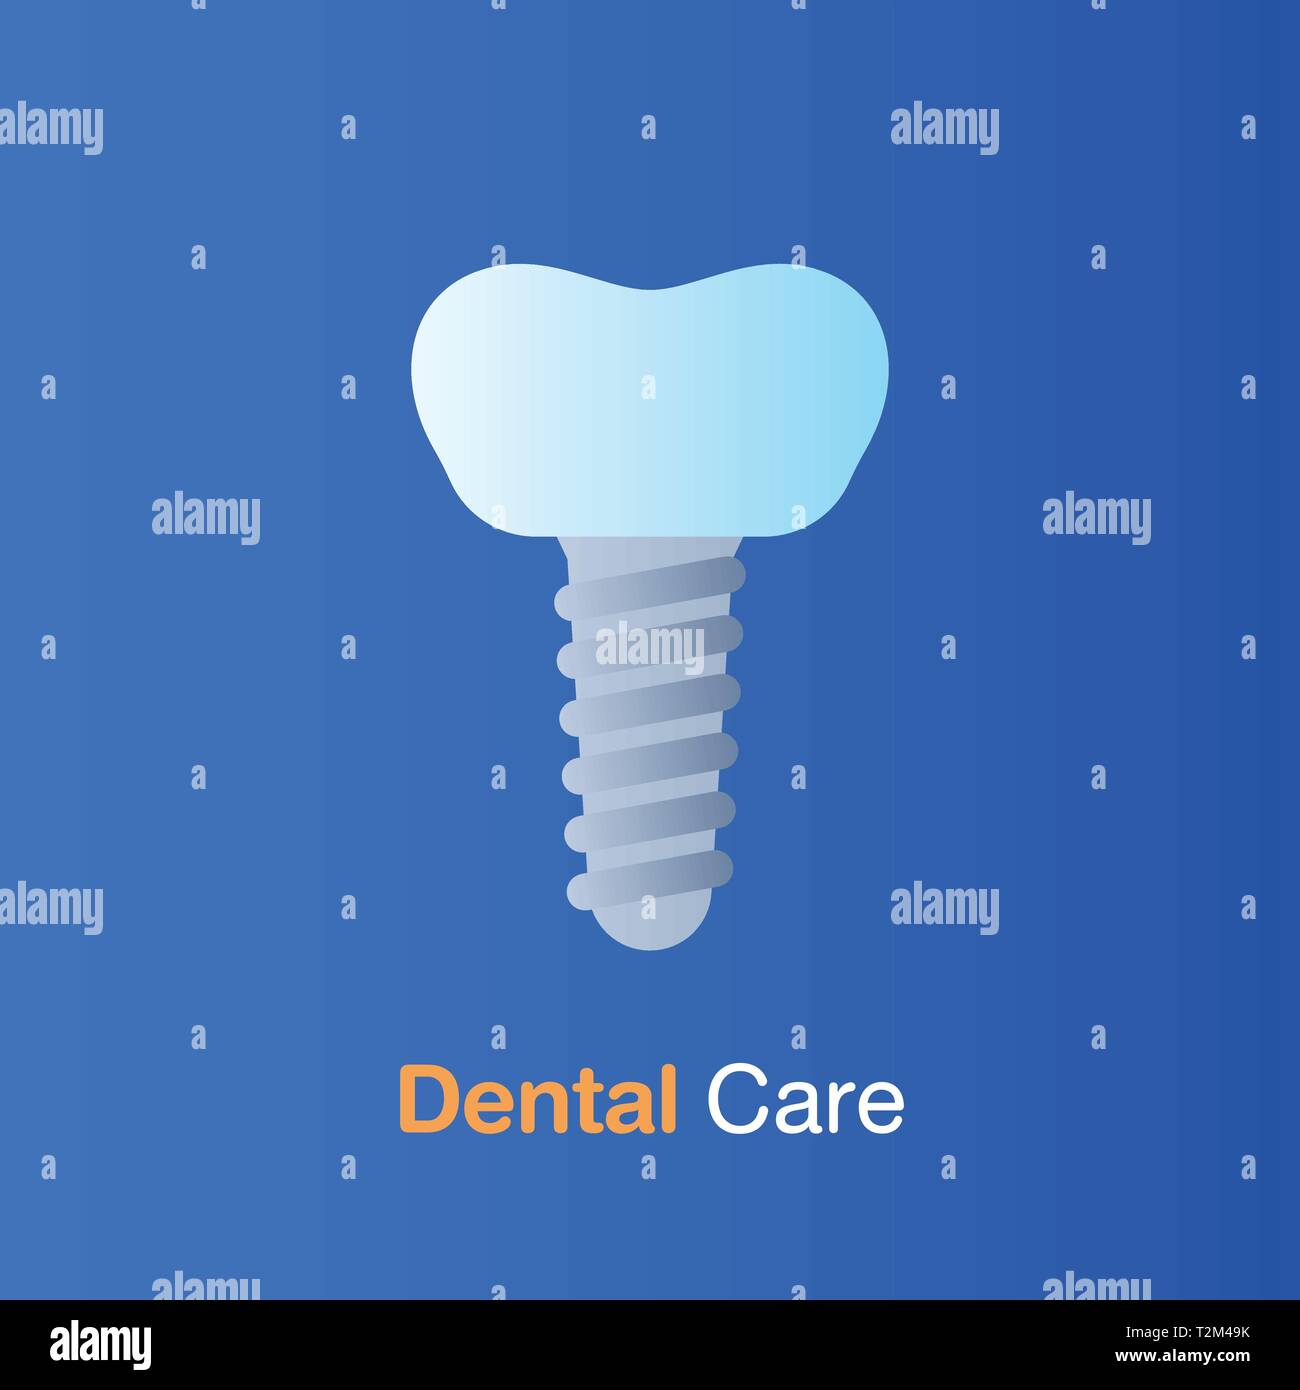 Dental care concept. Implant dentistry, root canal therapy, prevention, check up and dental treatment. Vector illustration. Stock Vector